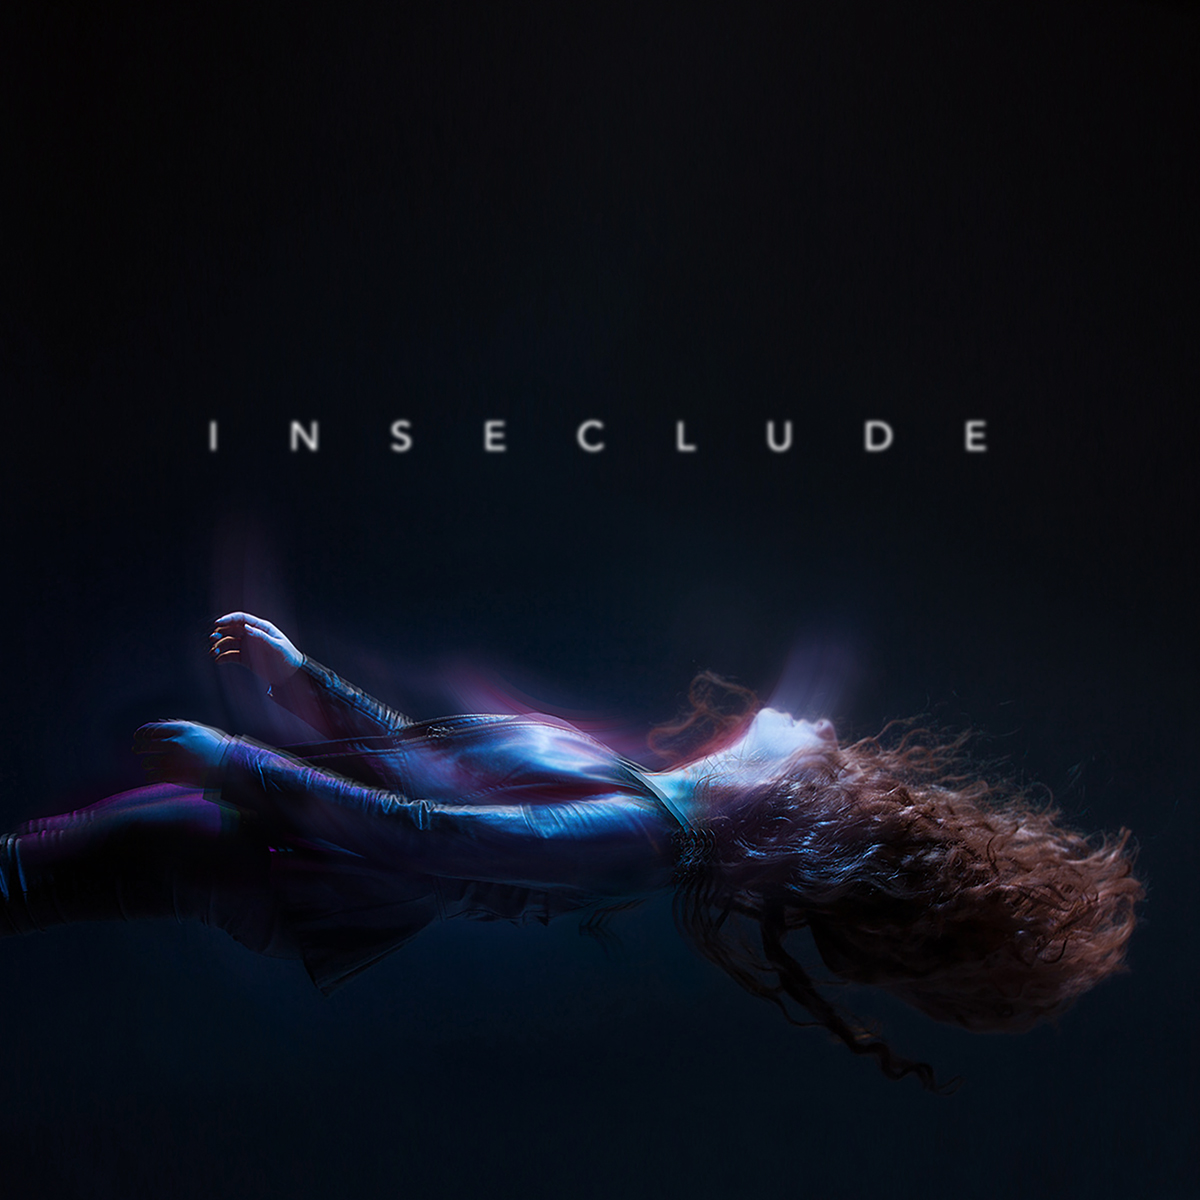 INSECLUDE : Inseclude